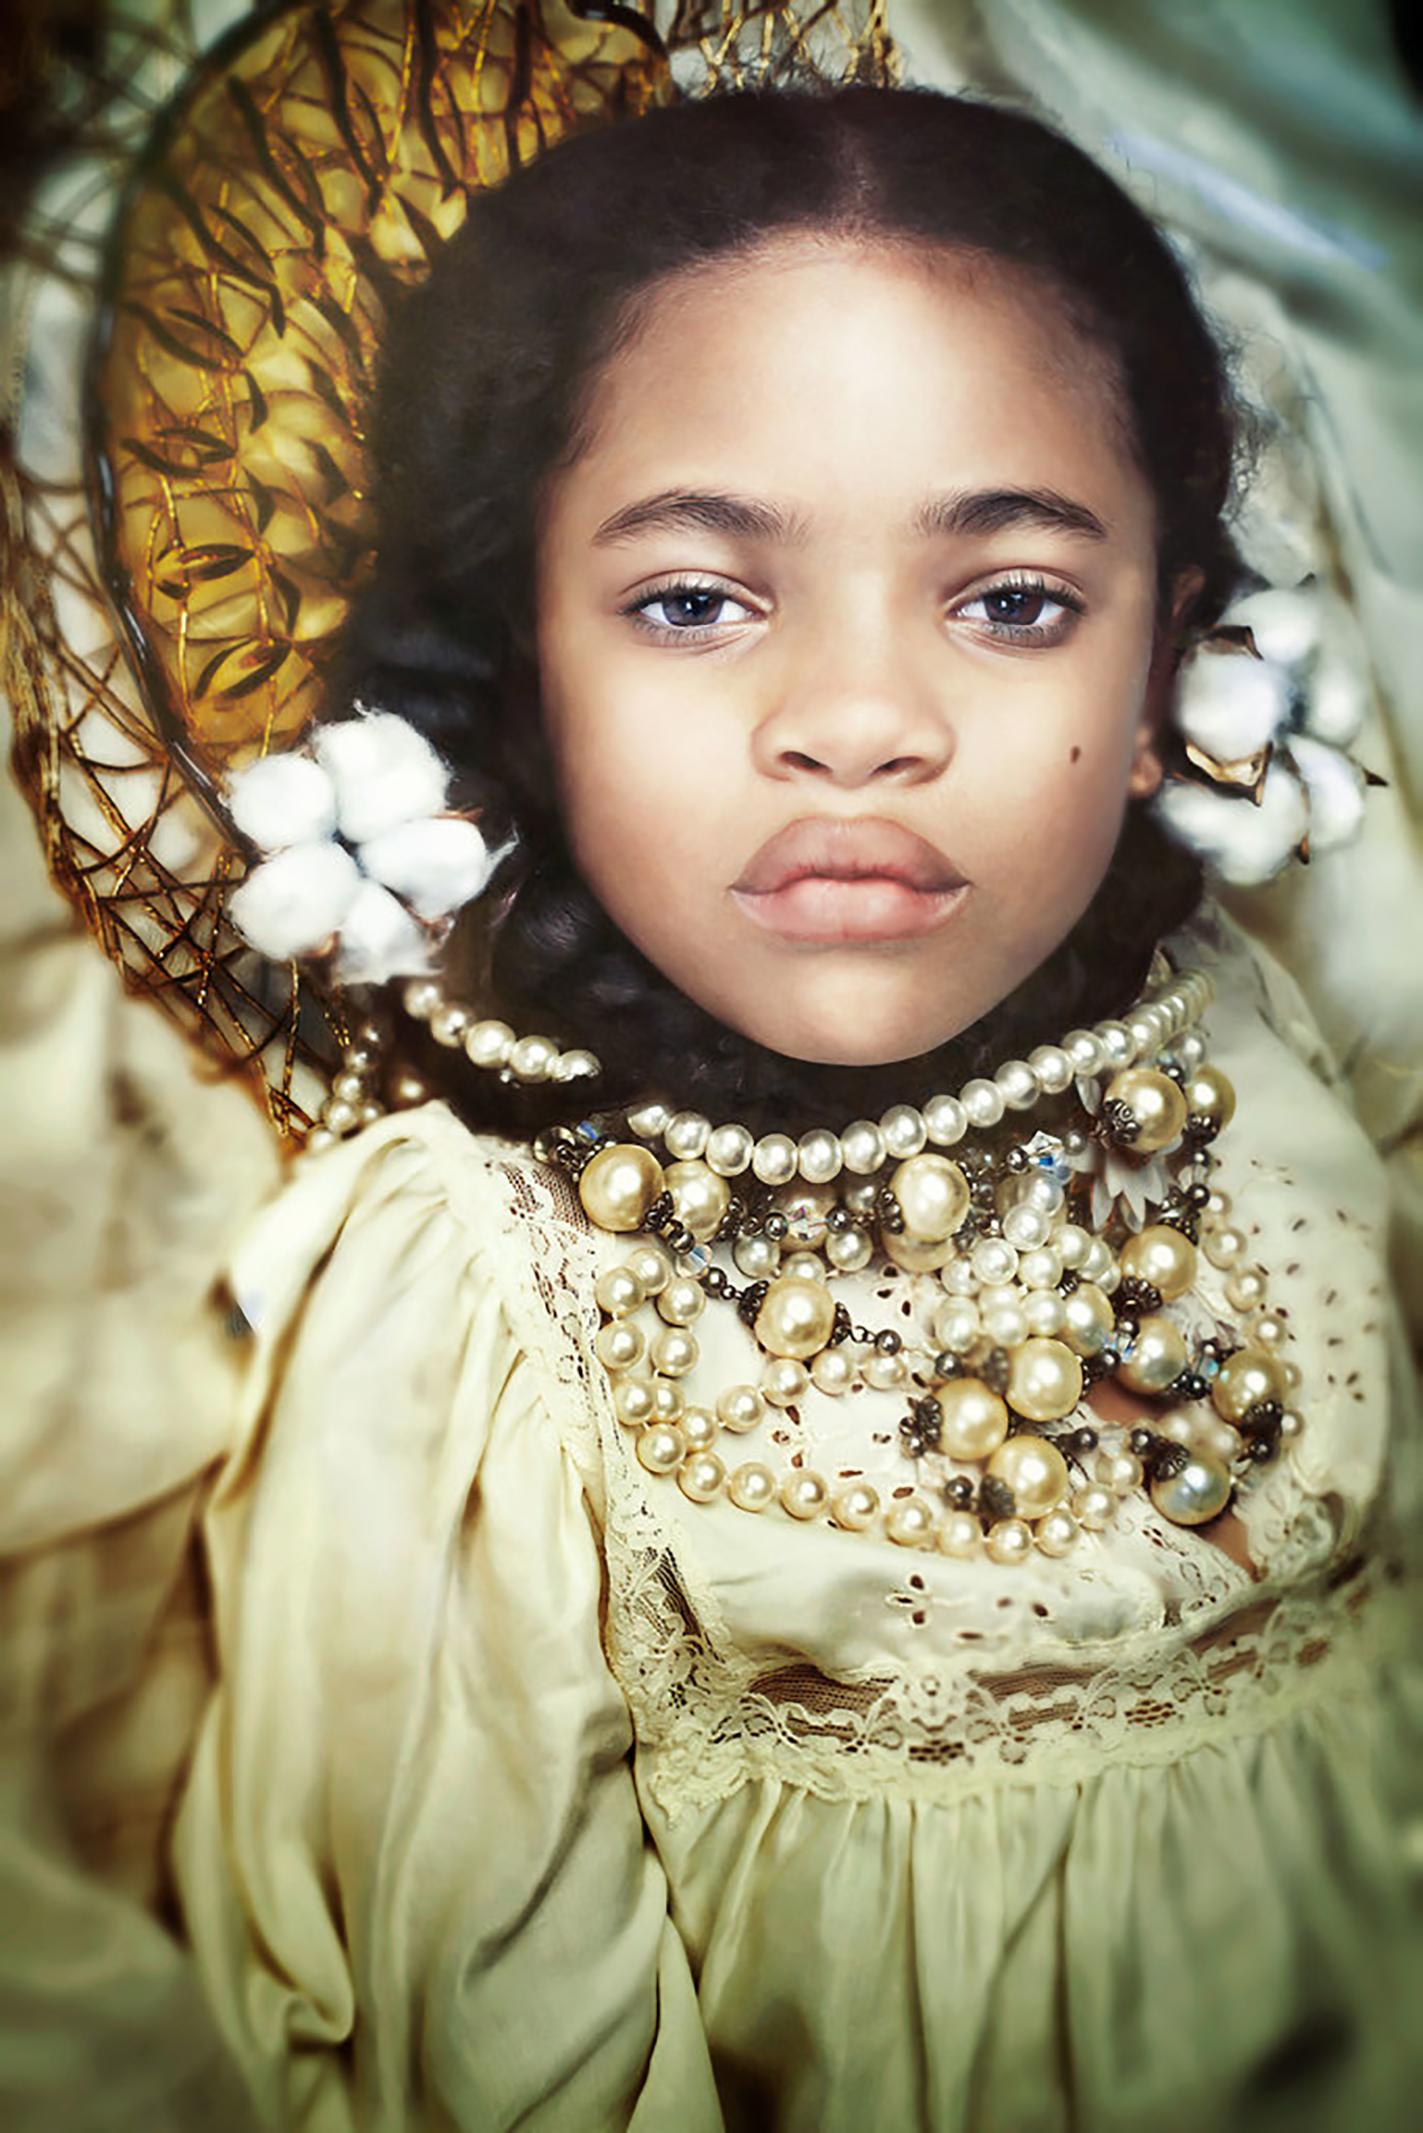 Our Worth > Cotton & Gold- Contemporary Portrait Photograph of Young Black Girl